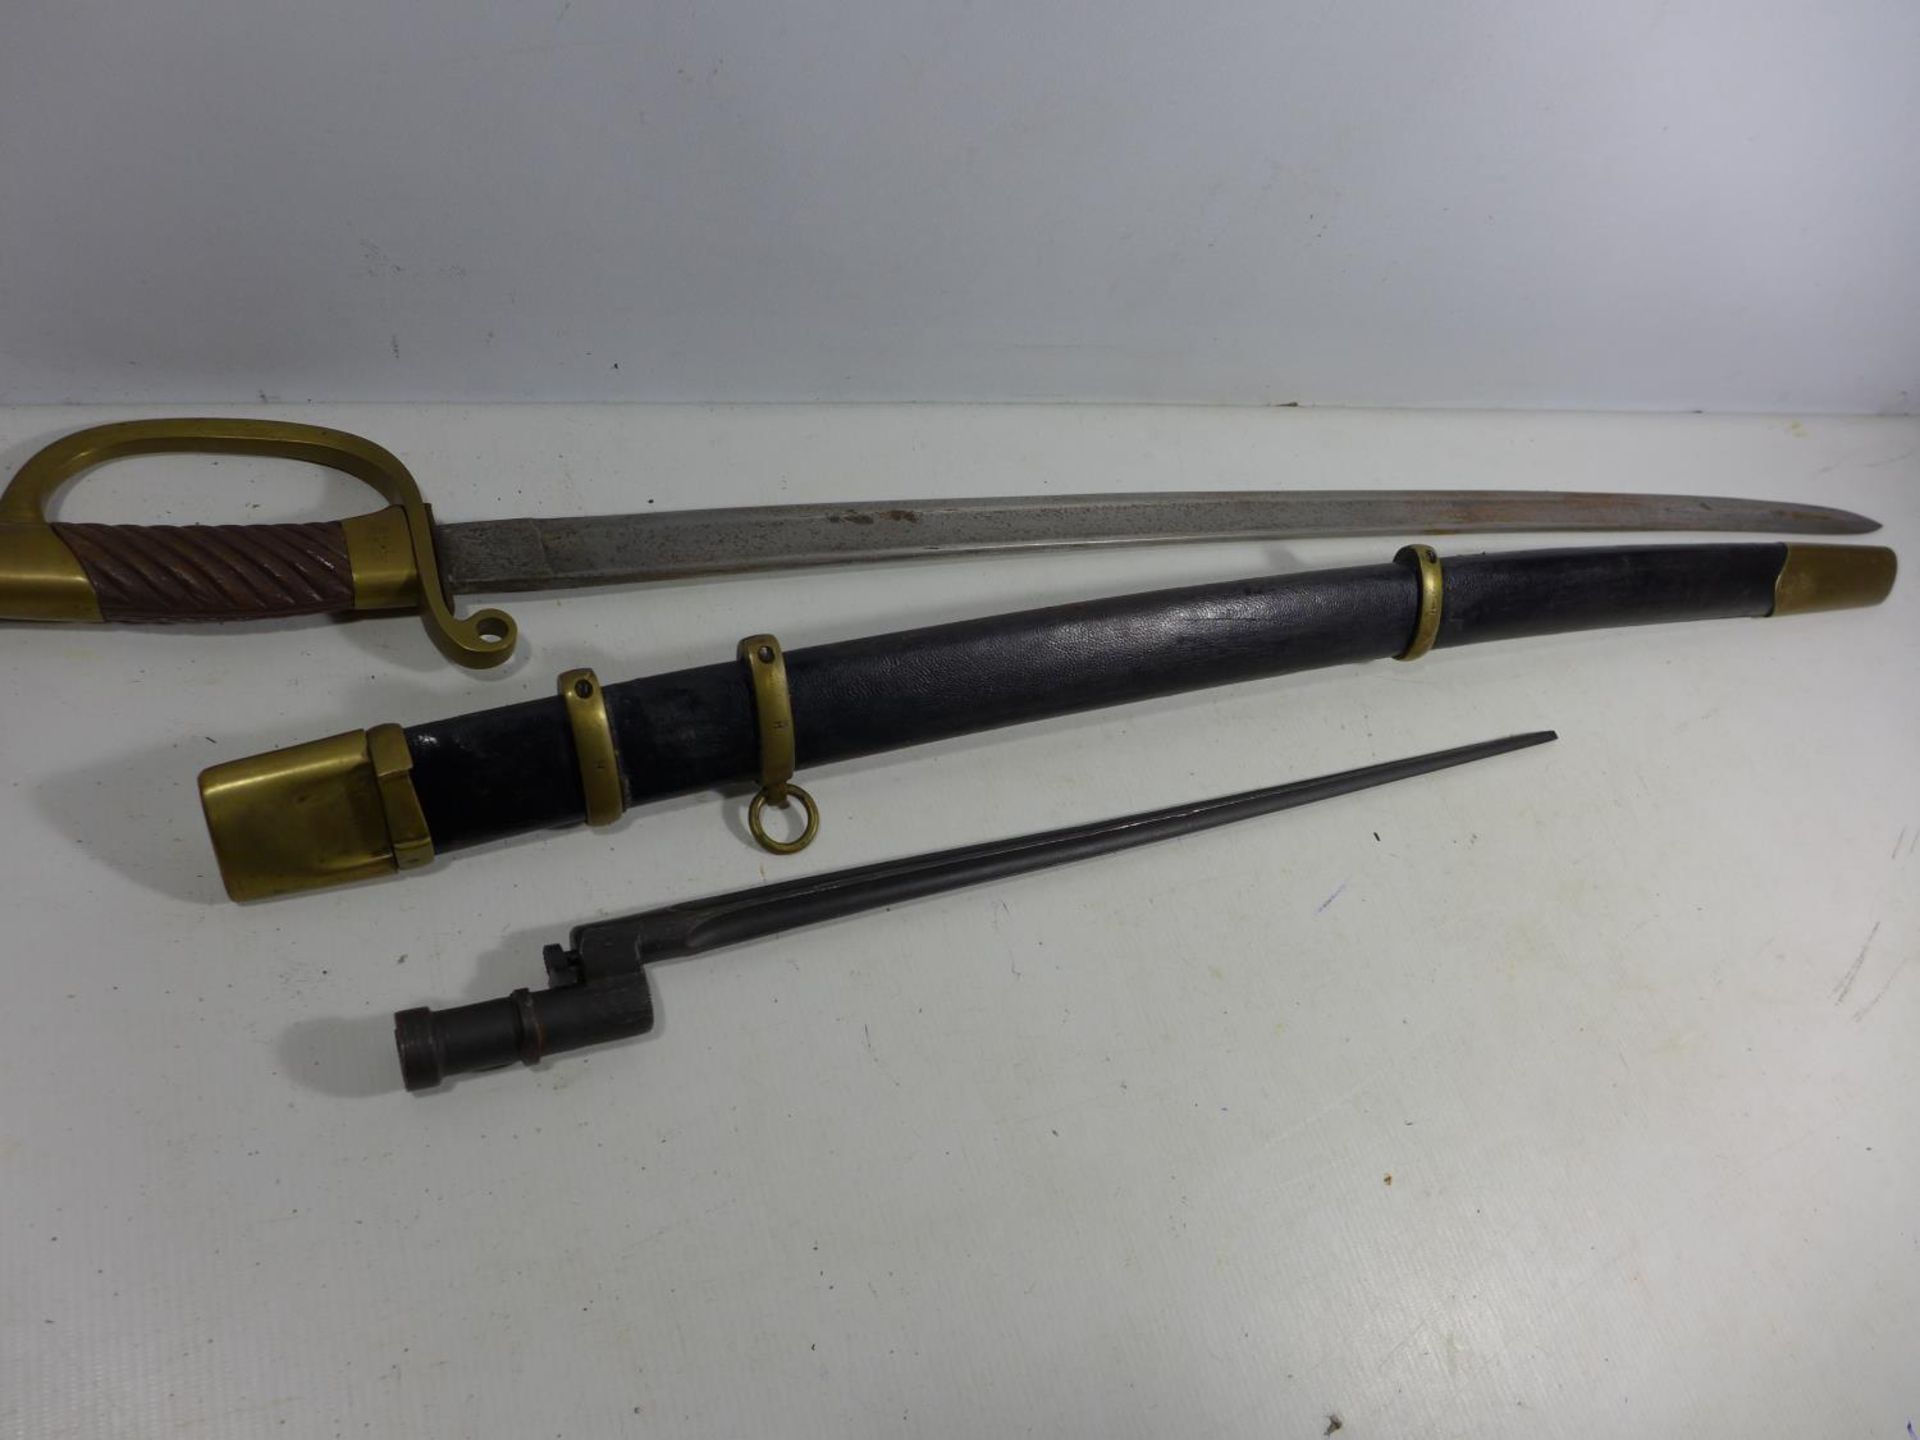 A REPLICA IMPERIAL RUSSIAN COSSACK SWORD AND SCABBARD WITH INTEGRAL BAYONET, 82CM BLADE, LENGTH 98CM - Image 3 of 7